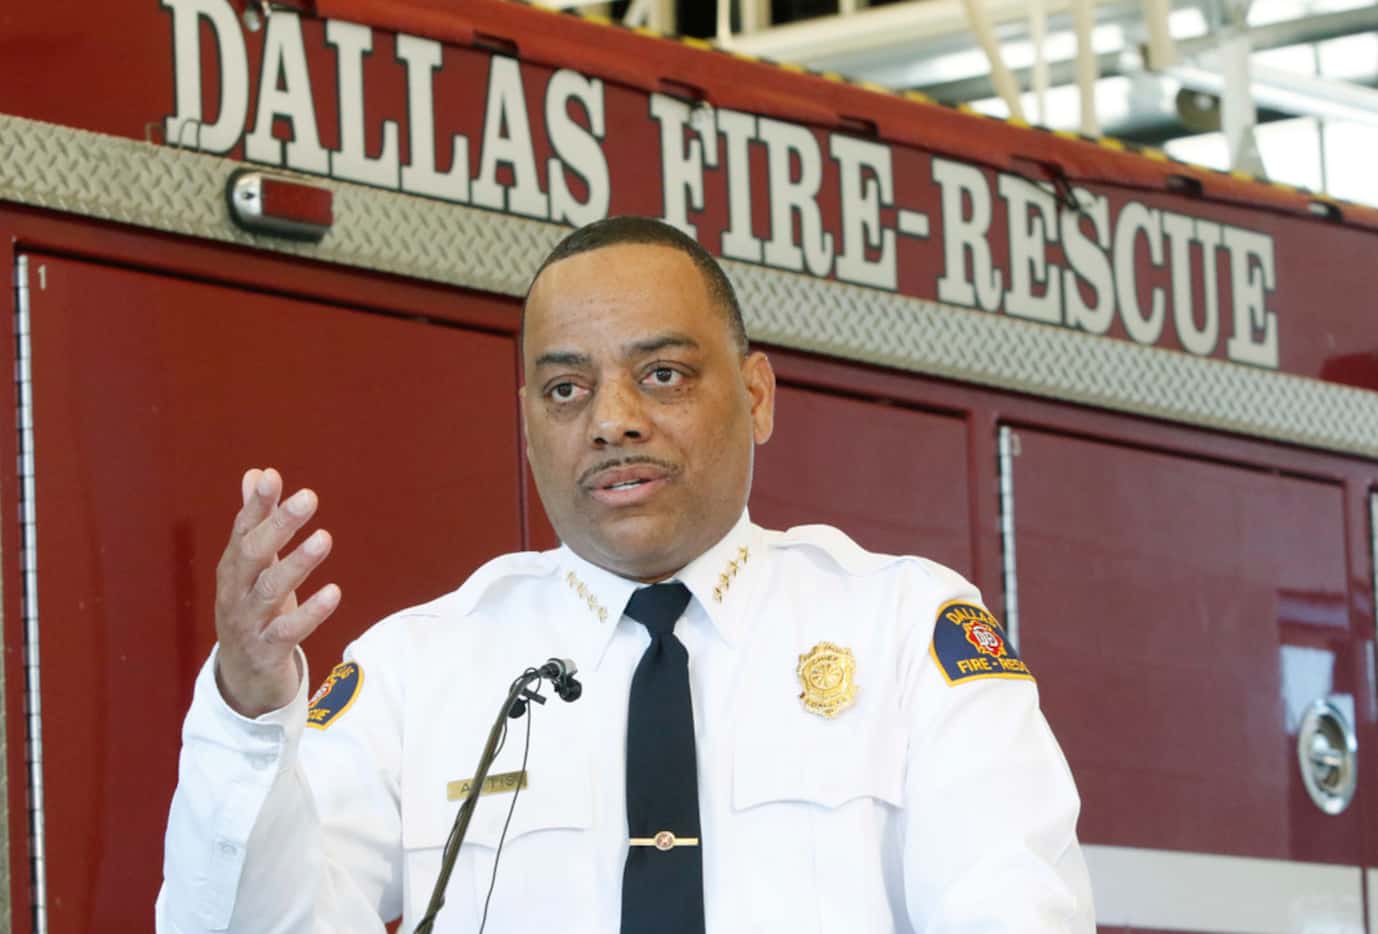 Dallas Fire-Rescue Chief Dominique Artis spoke to the news media Friday at Fire Station 6 in...